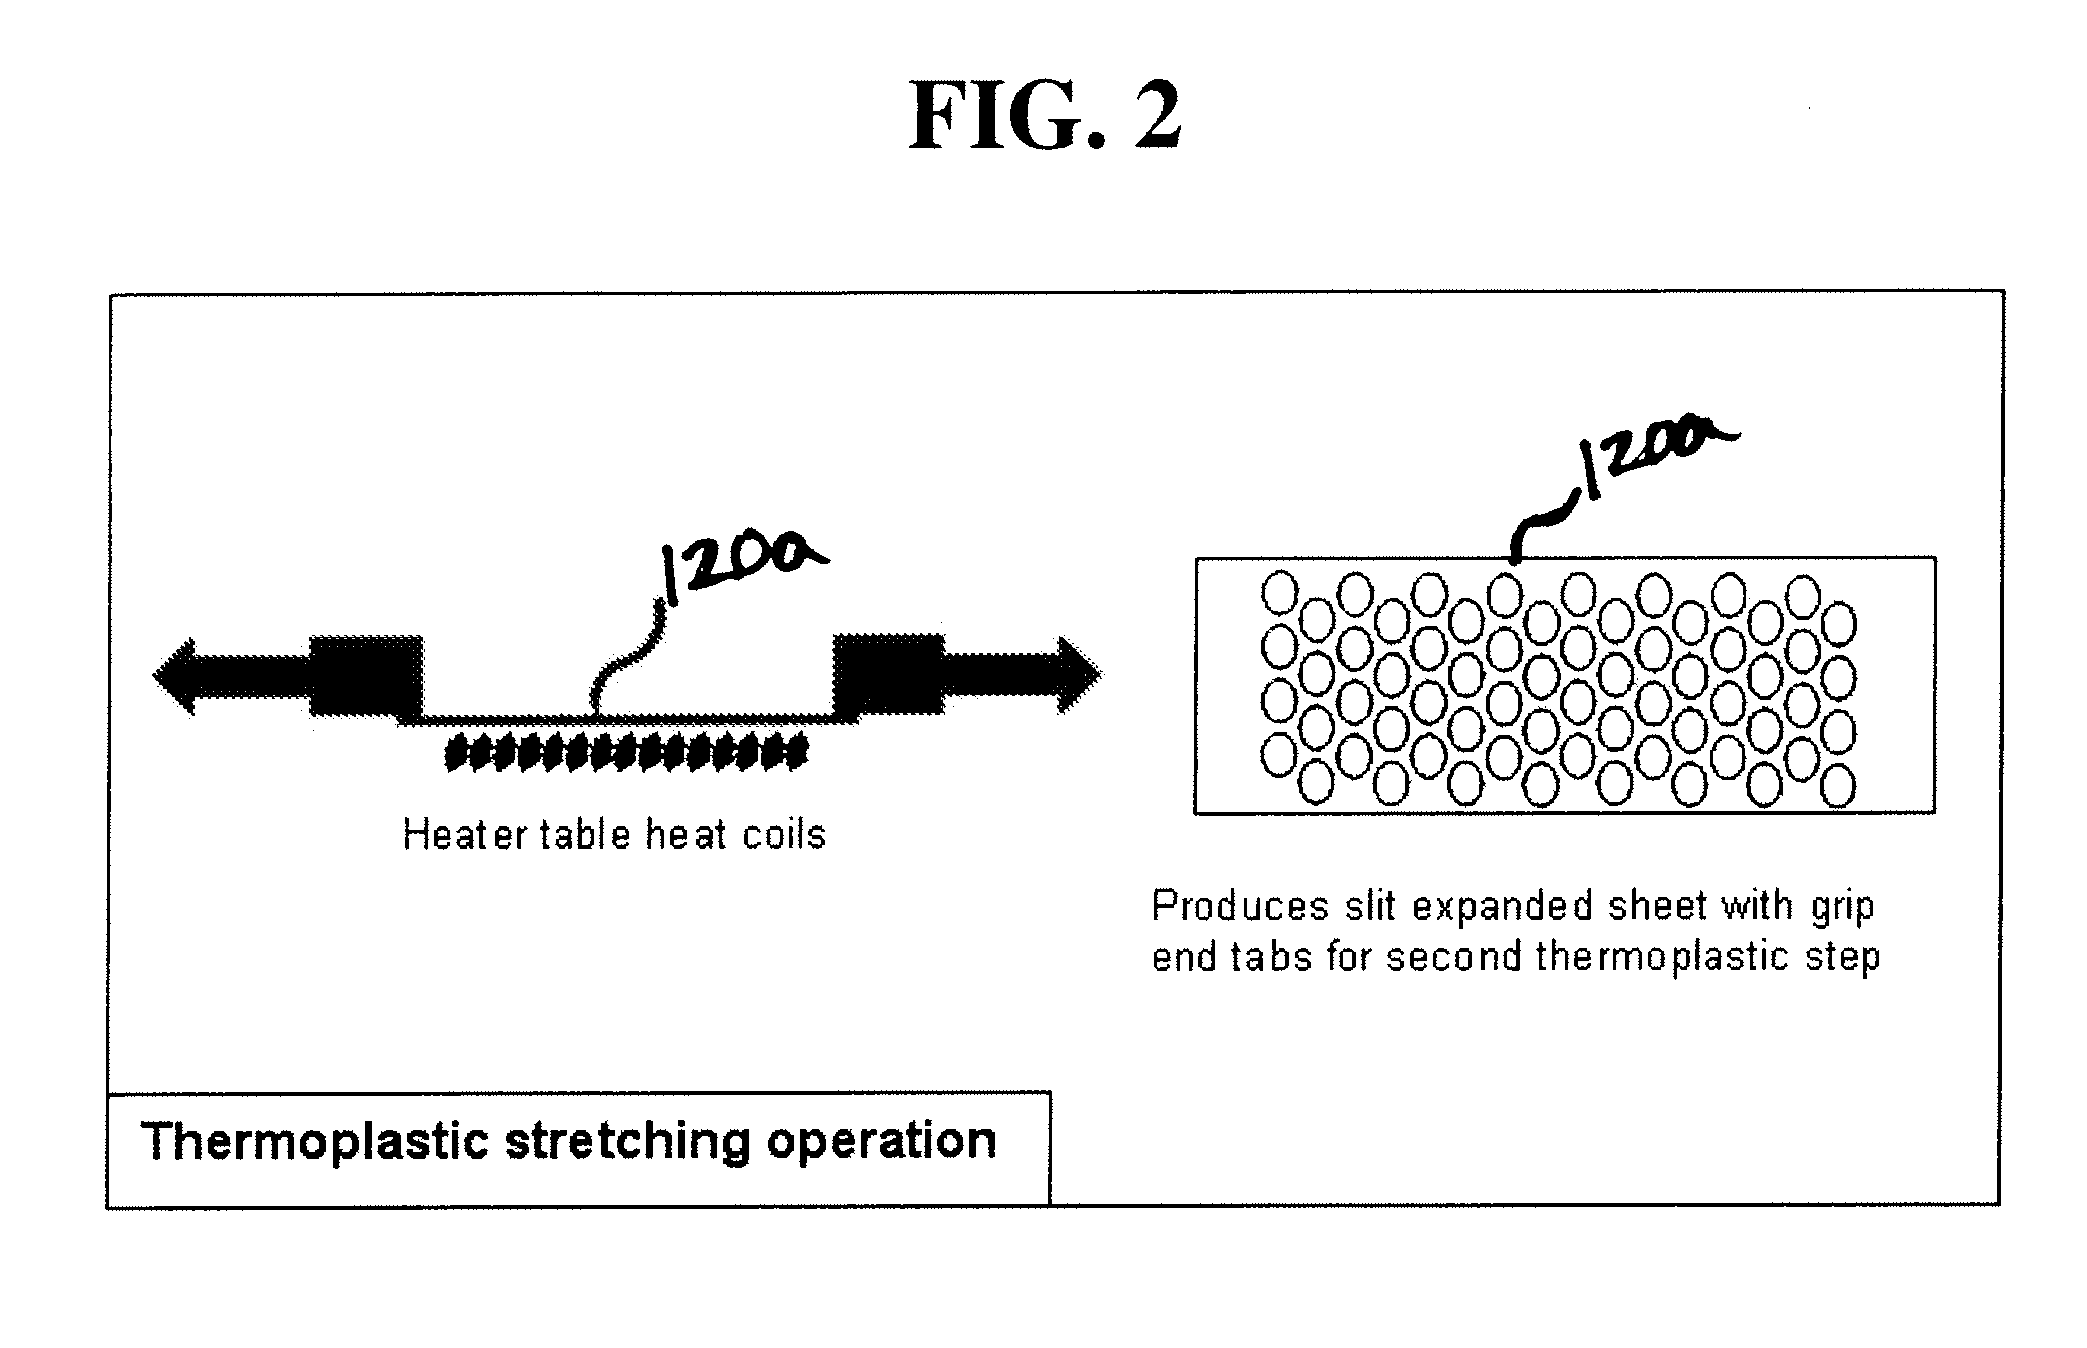 Multilayered cellular metallic glass structures and methods of preparing the same